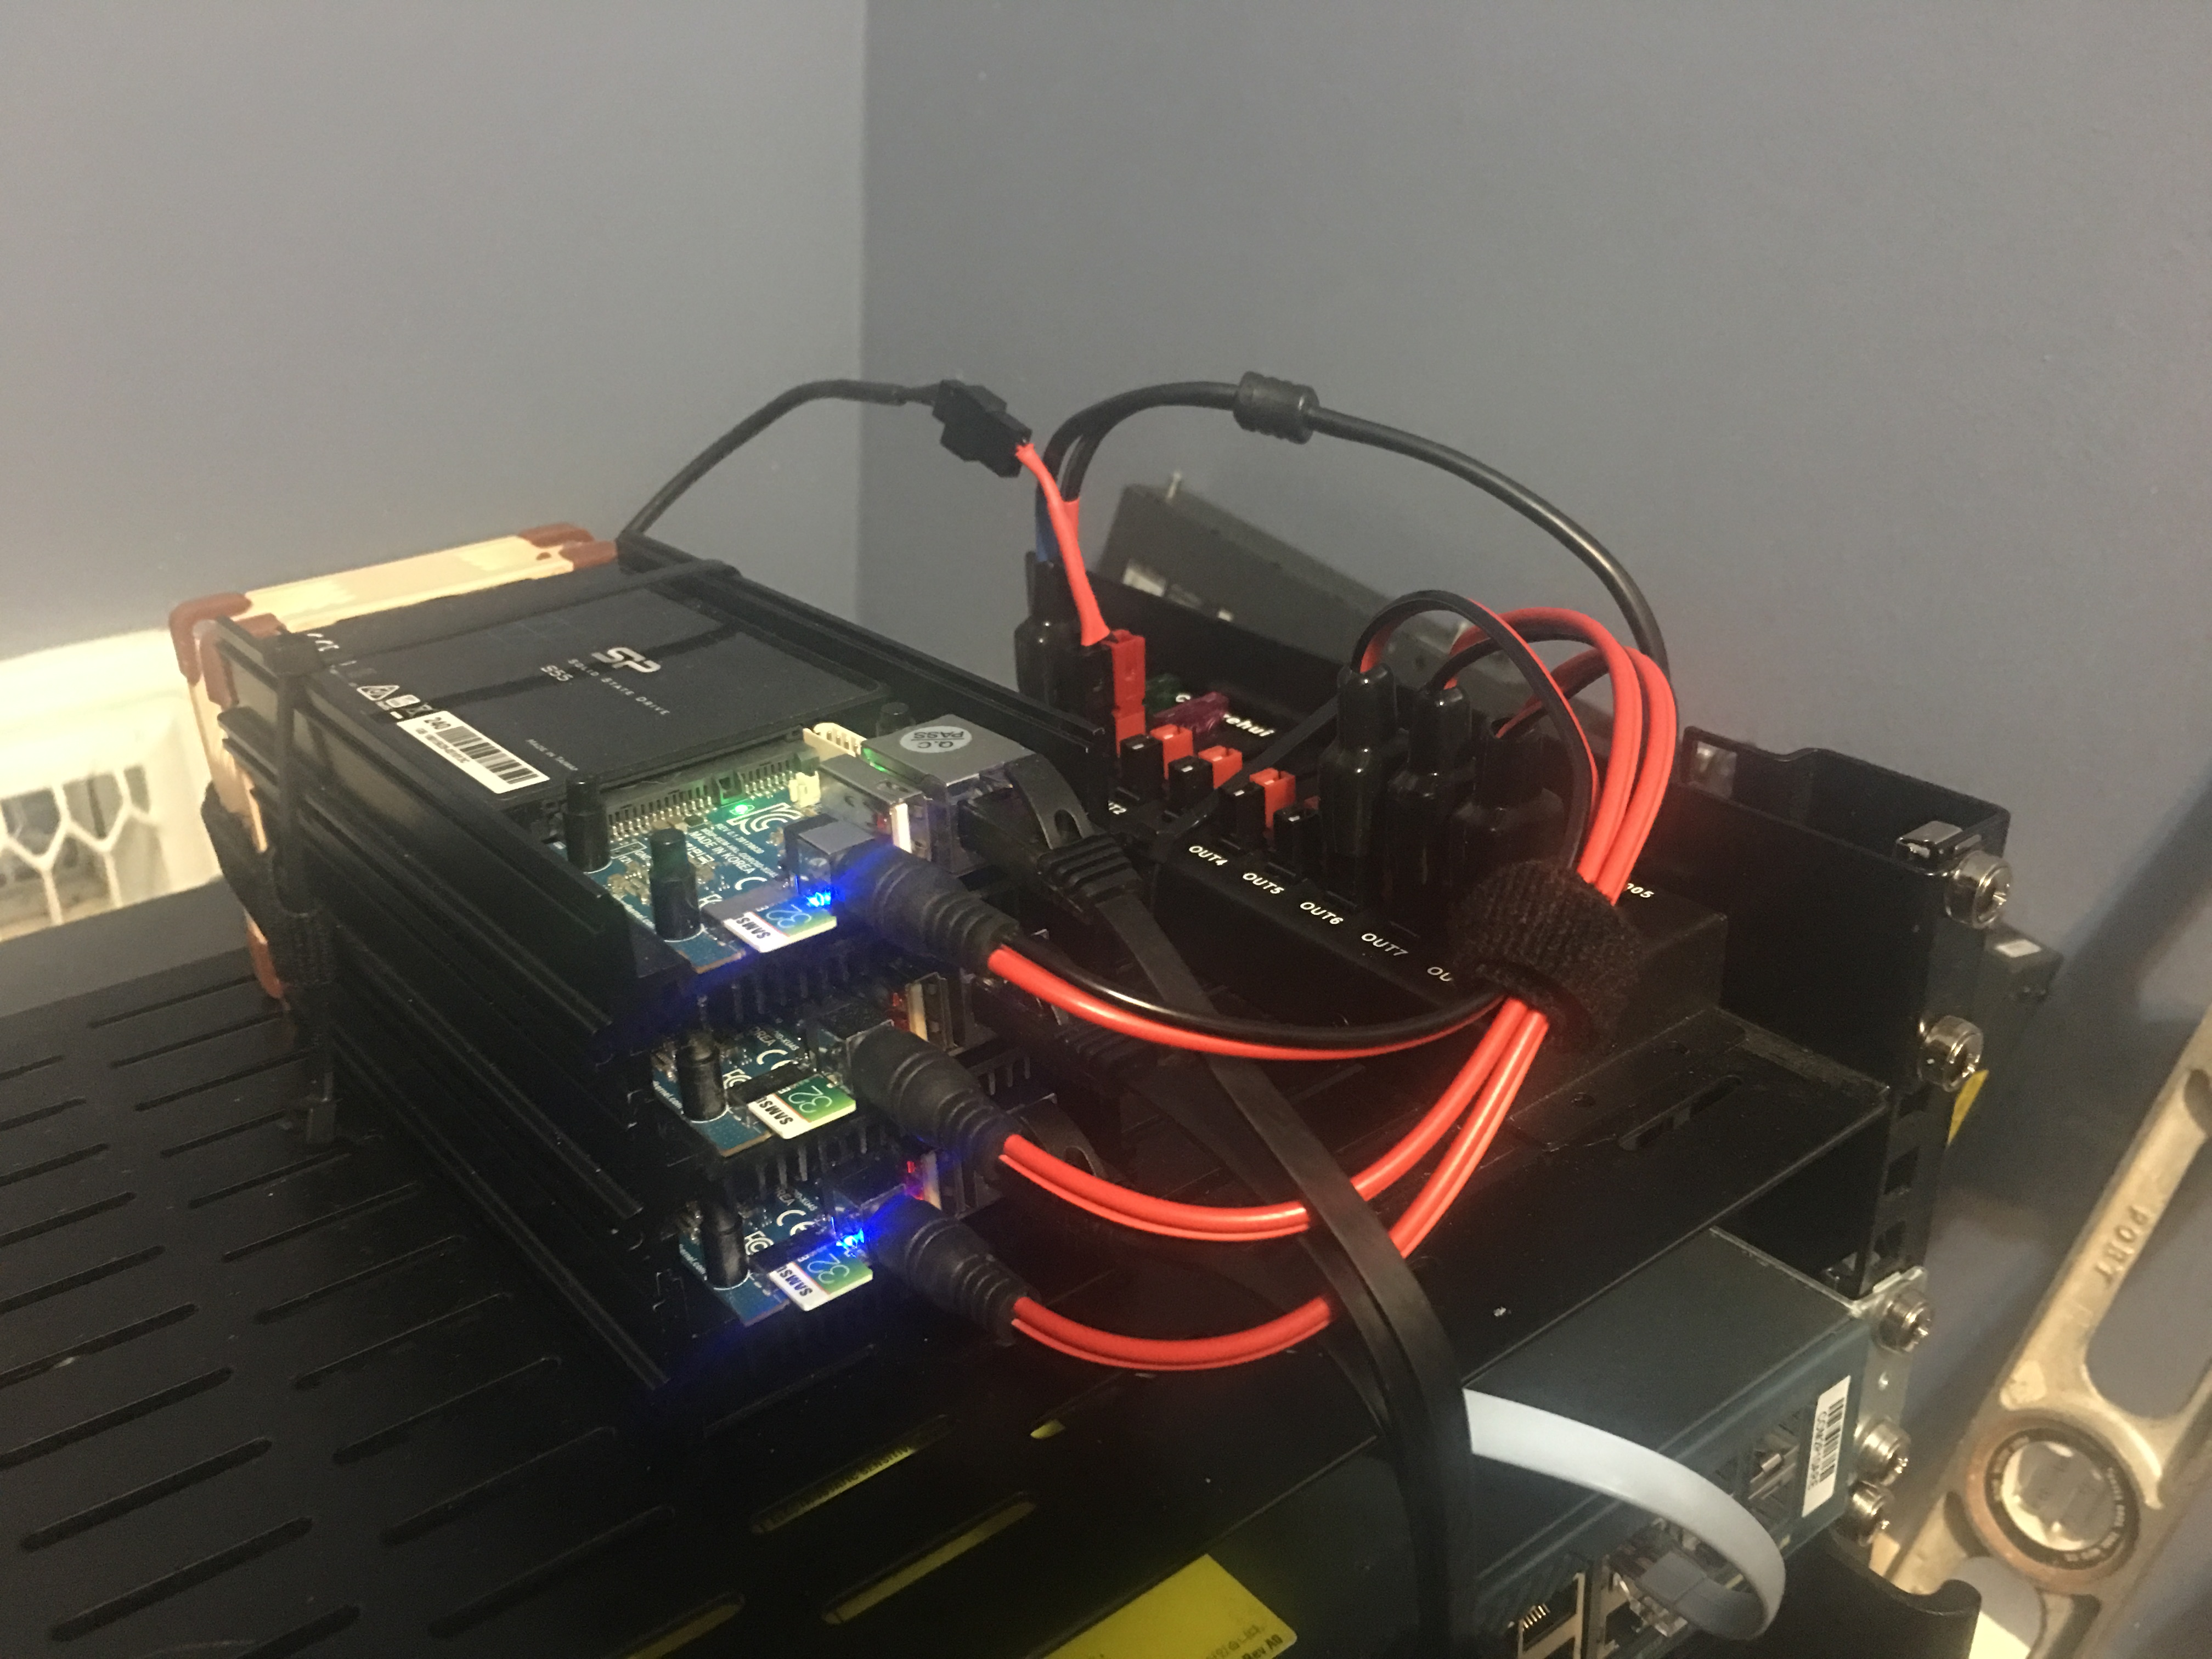 Picture of Odroid cluster